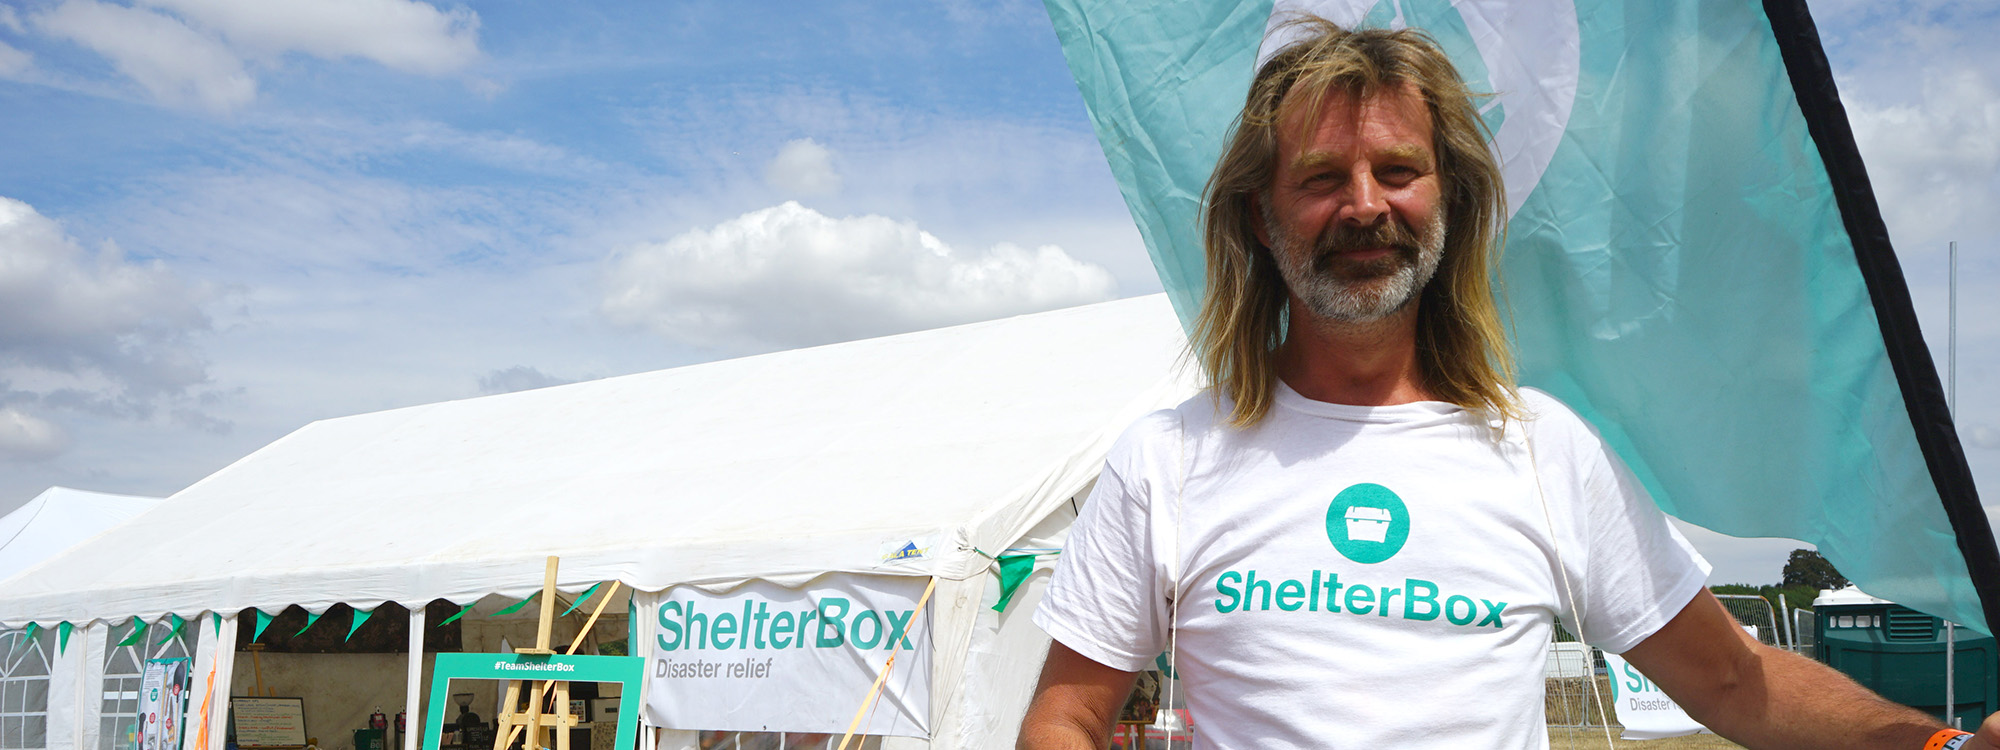 Man wearing ShelterBox t-shirt outside marquee